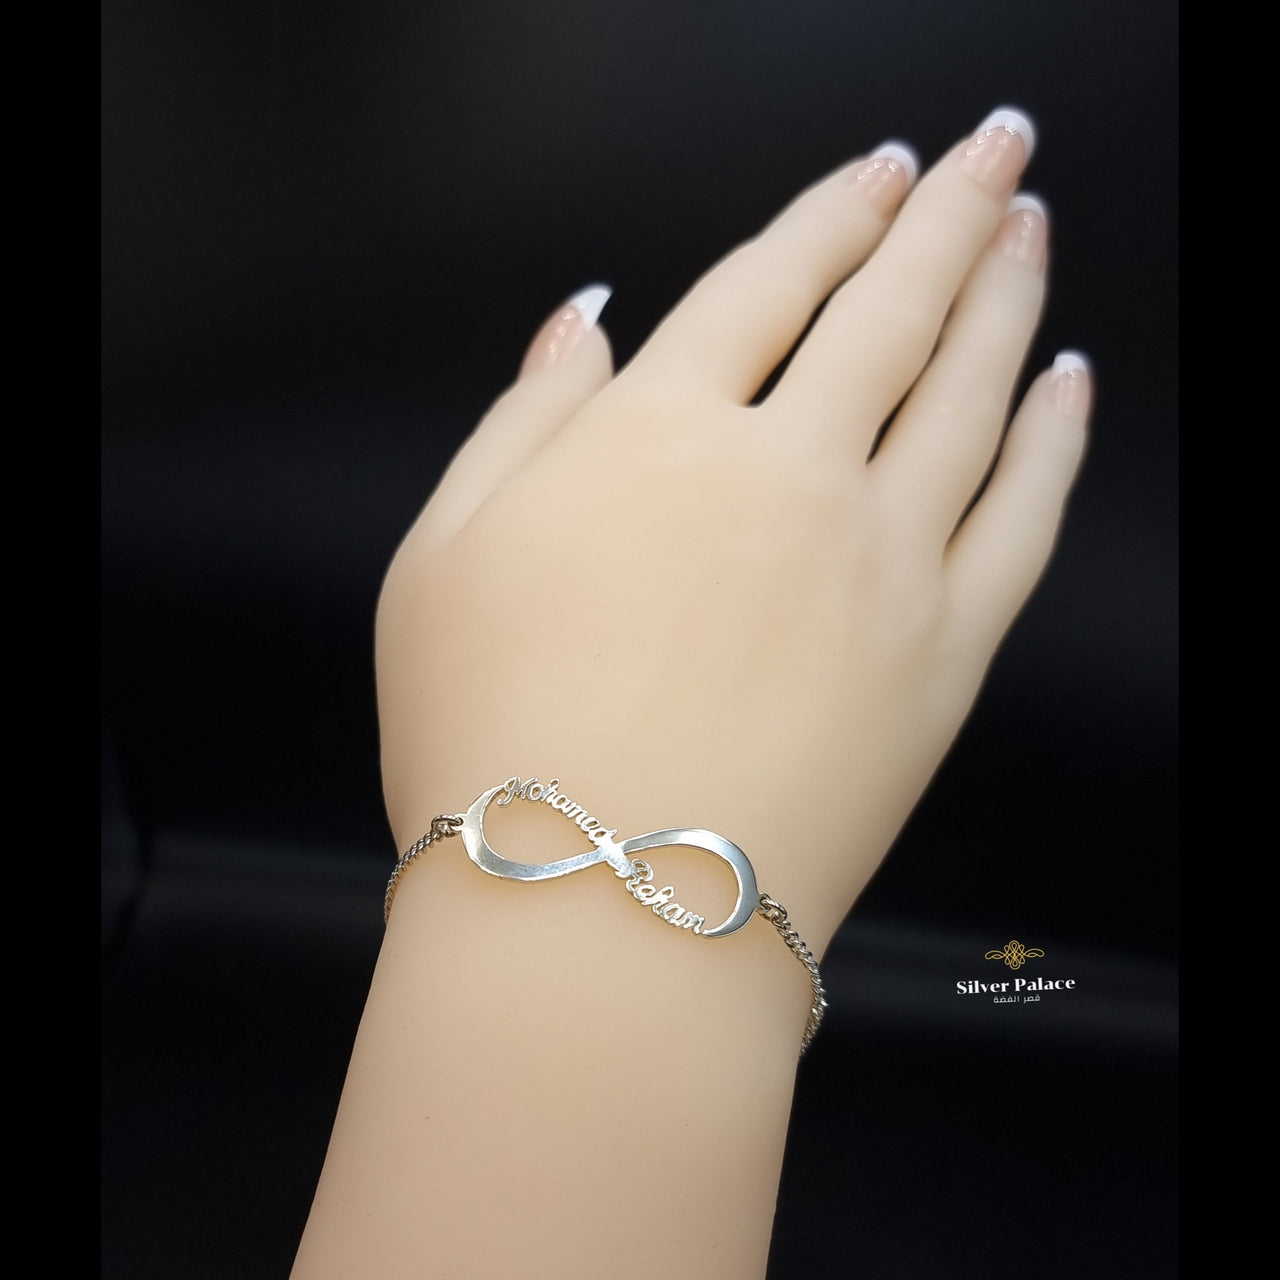 Personalized infinity bracelet with 2 names